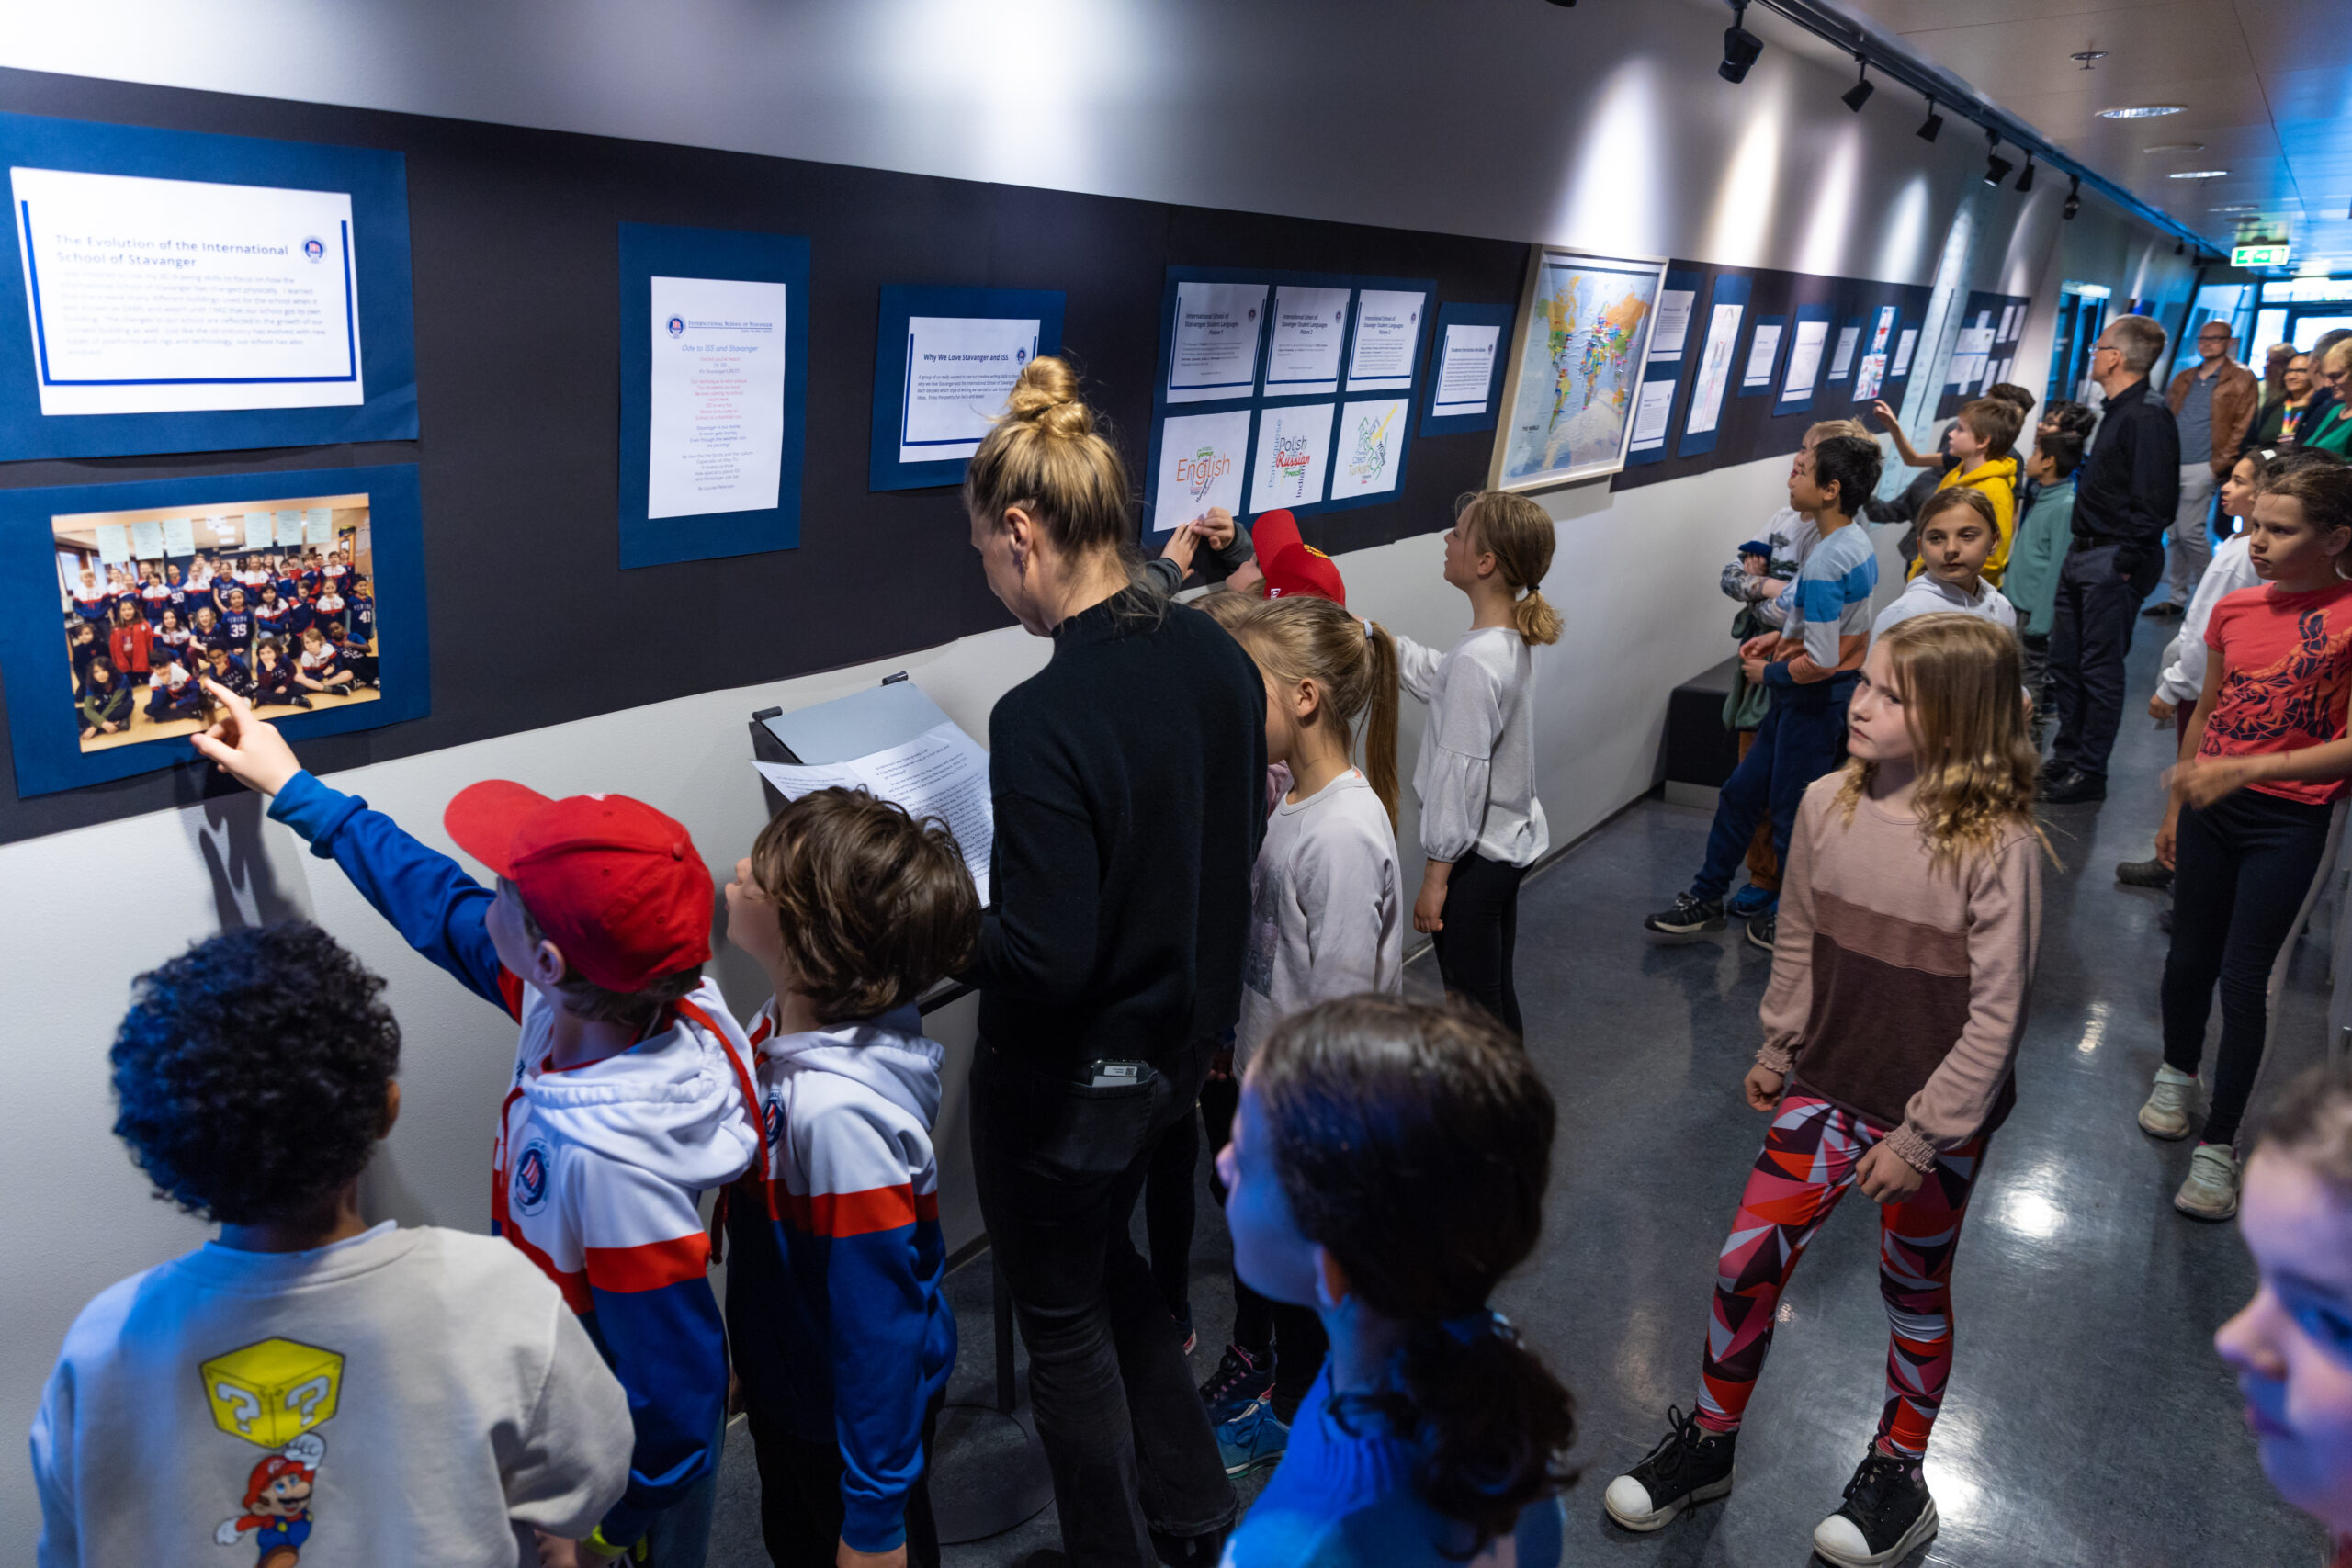 You are currently viewing Grade 4 Exhibition about Stavanger and the Oil at Petroleum Museum